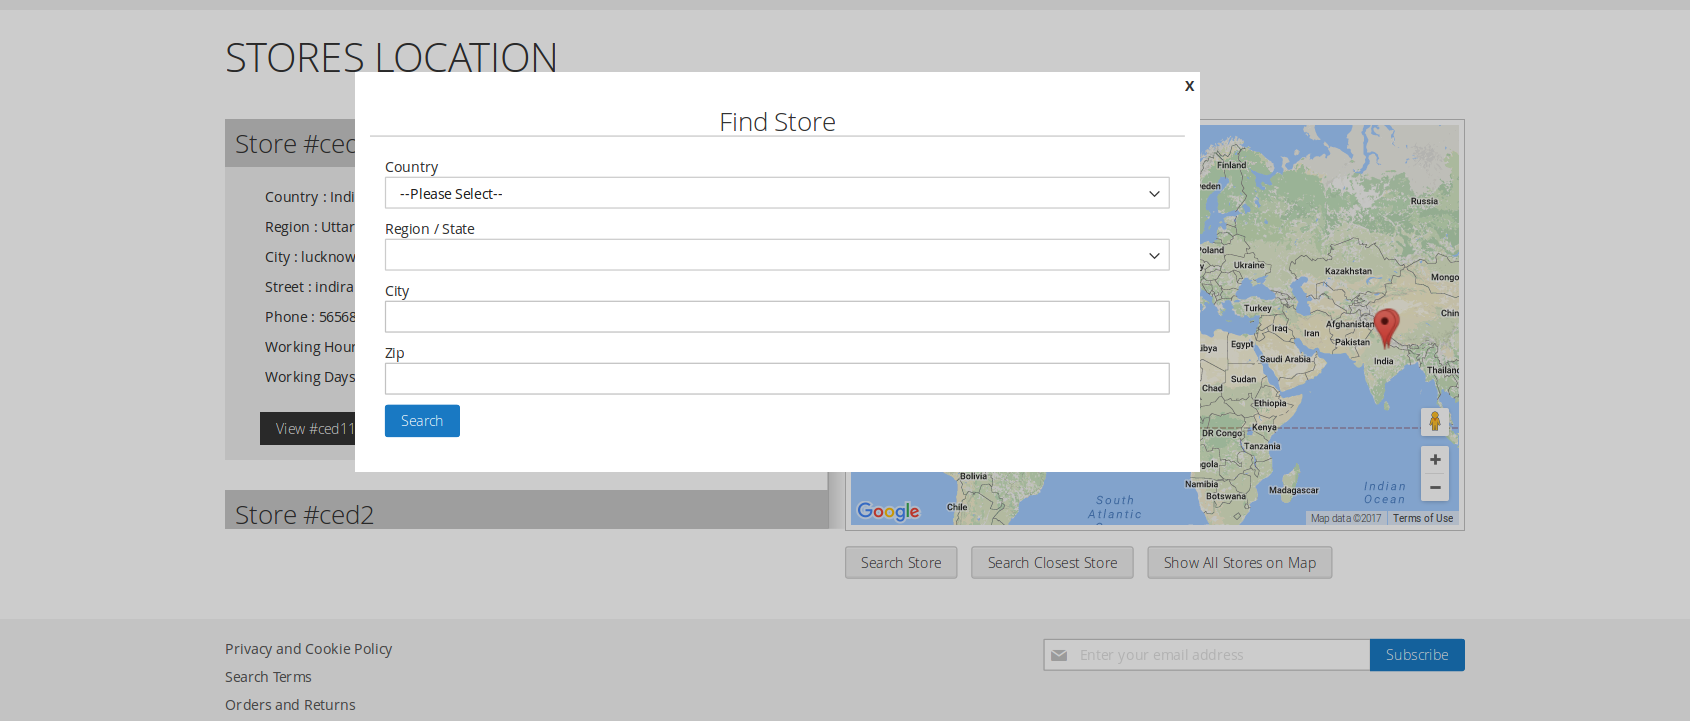 Search for the store using any one of the information